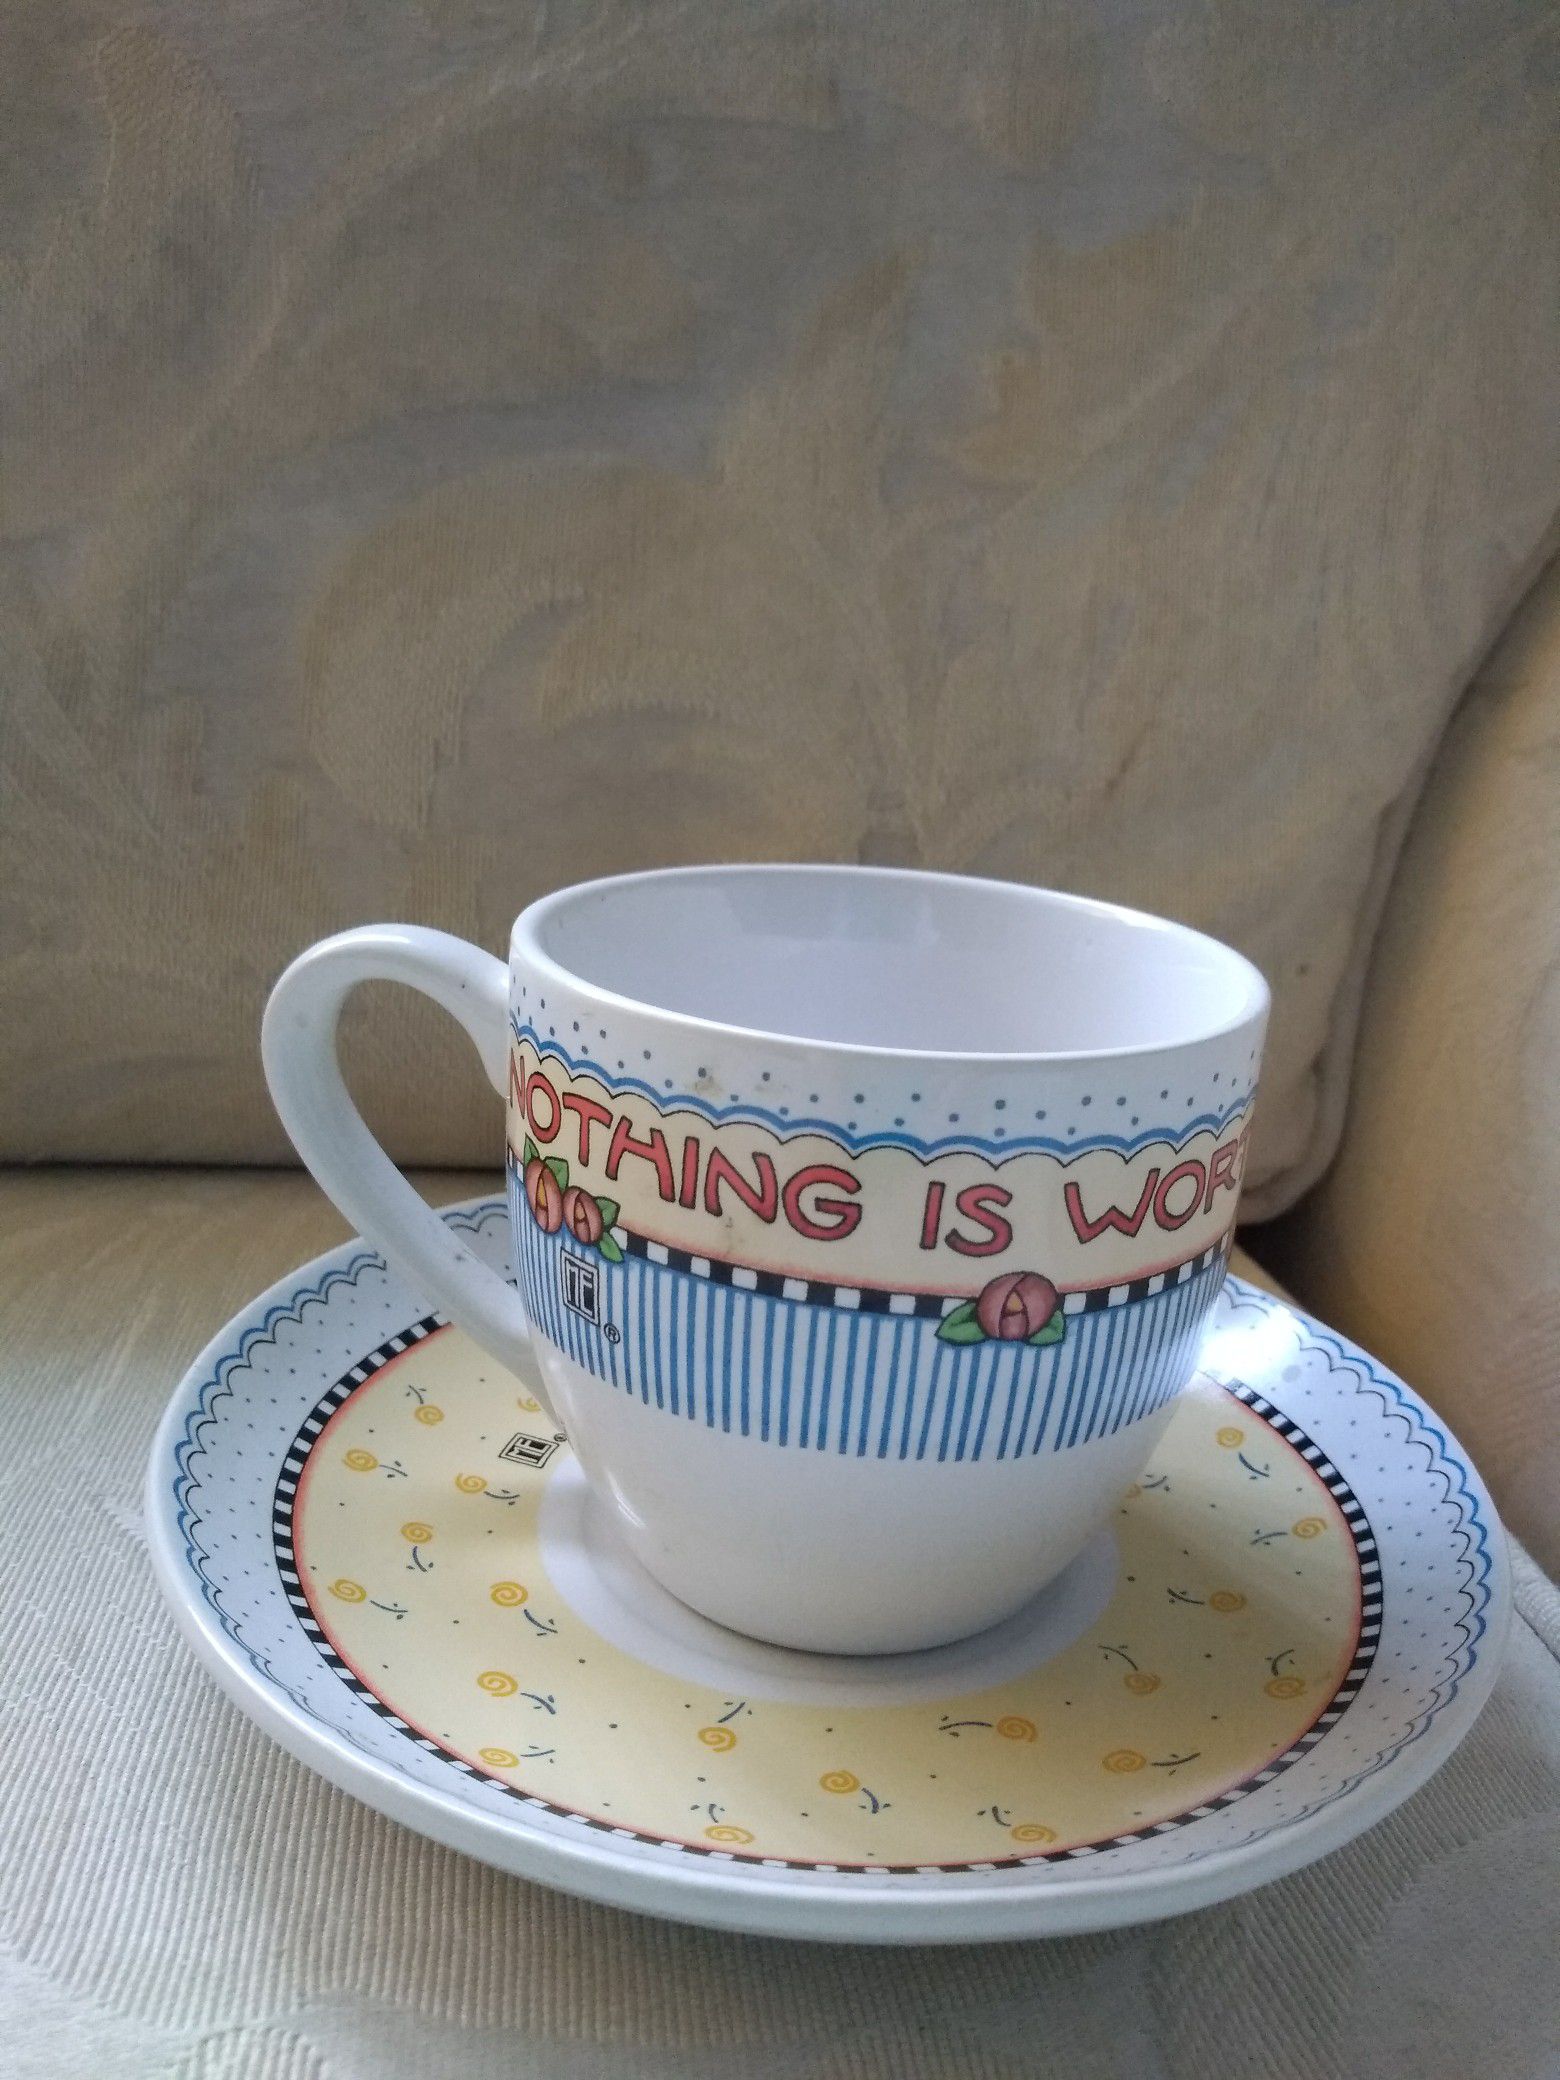 Mary Engelbreit Tea Cup "Nothing Is Worth More Than This Day"